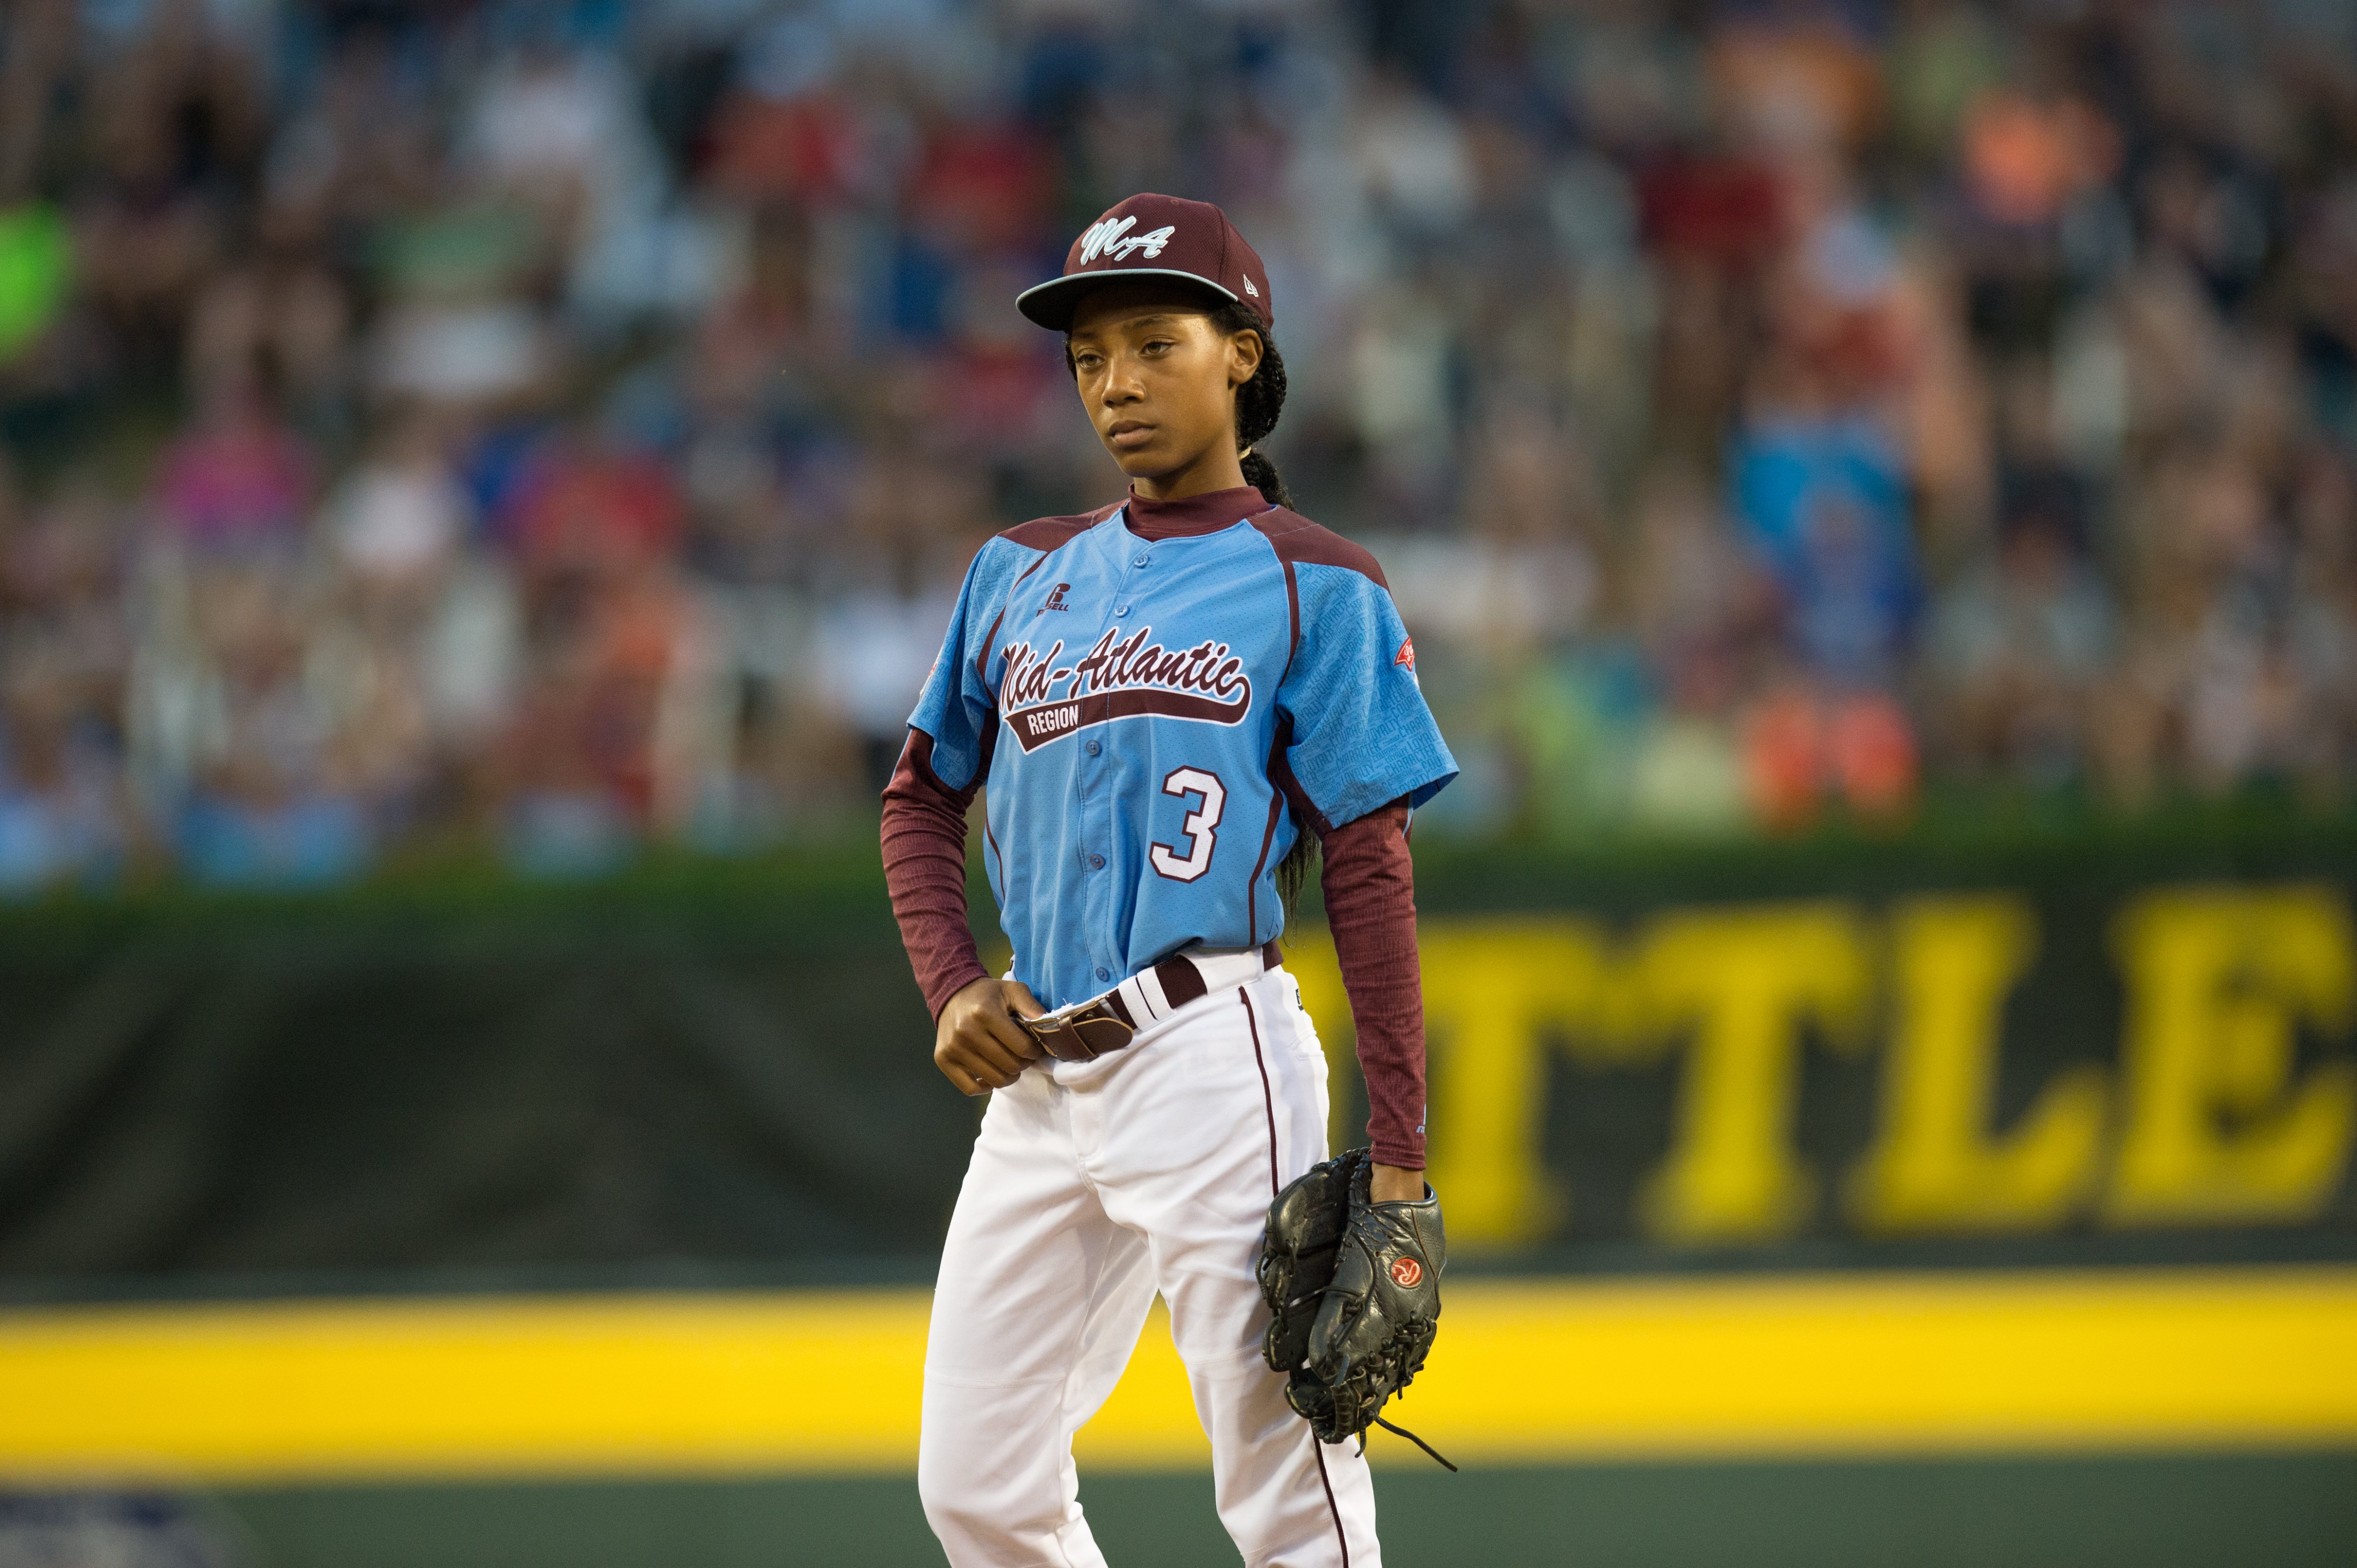 Starting pitcher Mo'ne Davis #3 of Pennsylvania pitches during the 2014 Little League World Series at Lamade Stadium on Aug. 20, 2014 in Williamsport, Penn. (Drew Hallowell—MLB Photos/Getty Images)